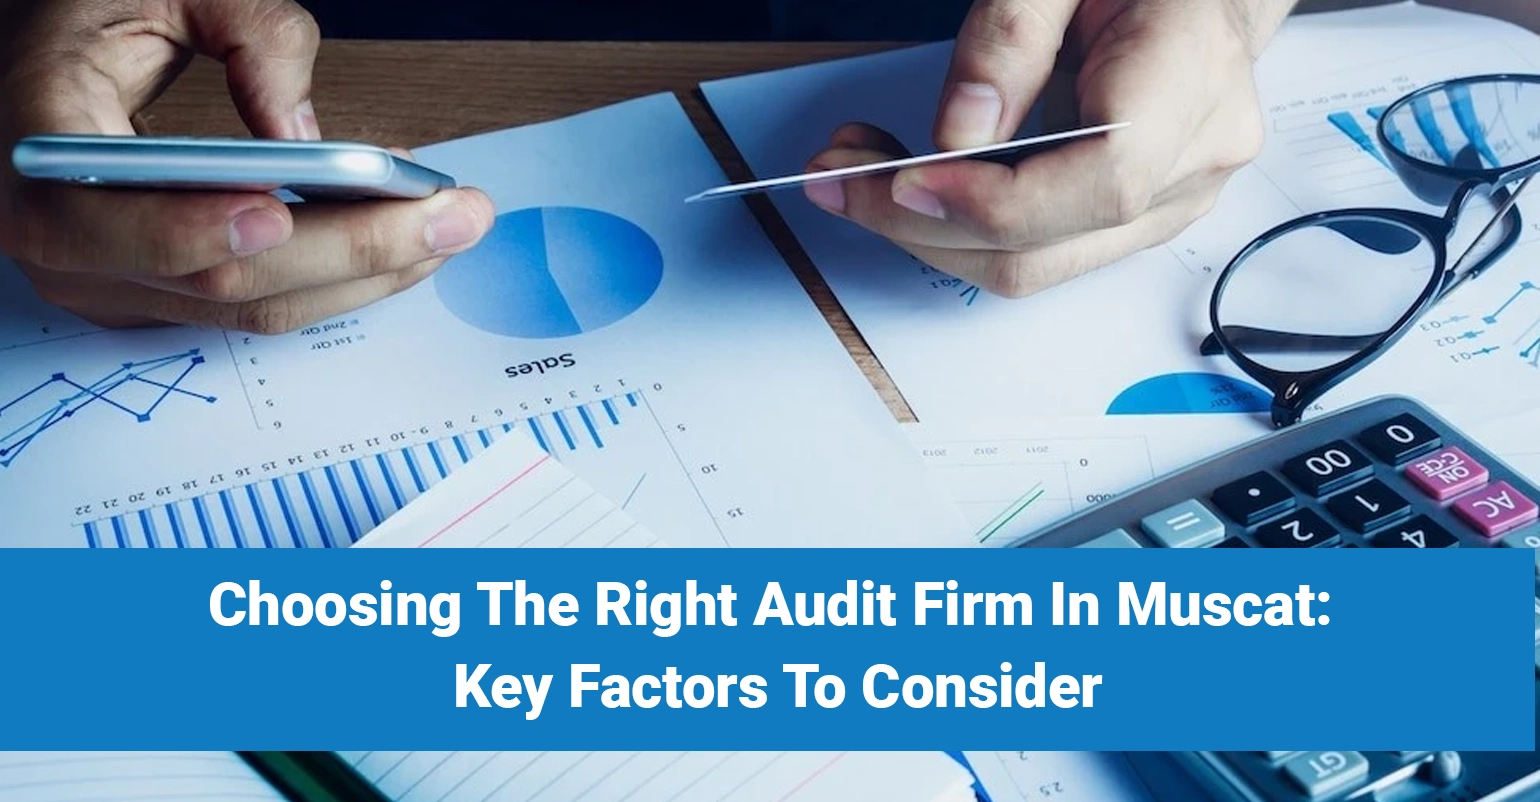 Choosing The Right Audit Firm In Muscat: Key Factors To Consider

